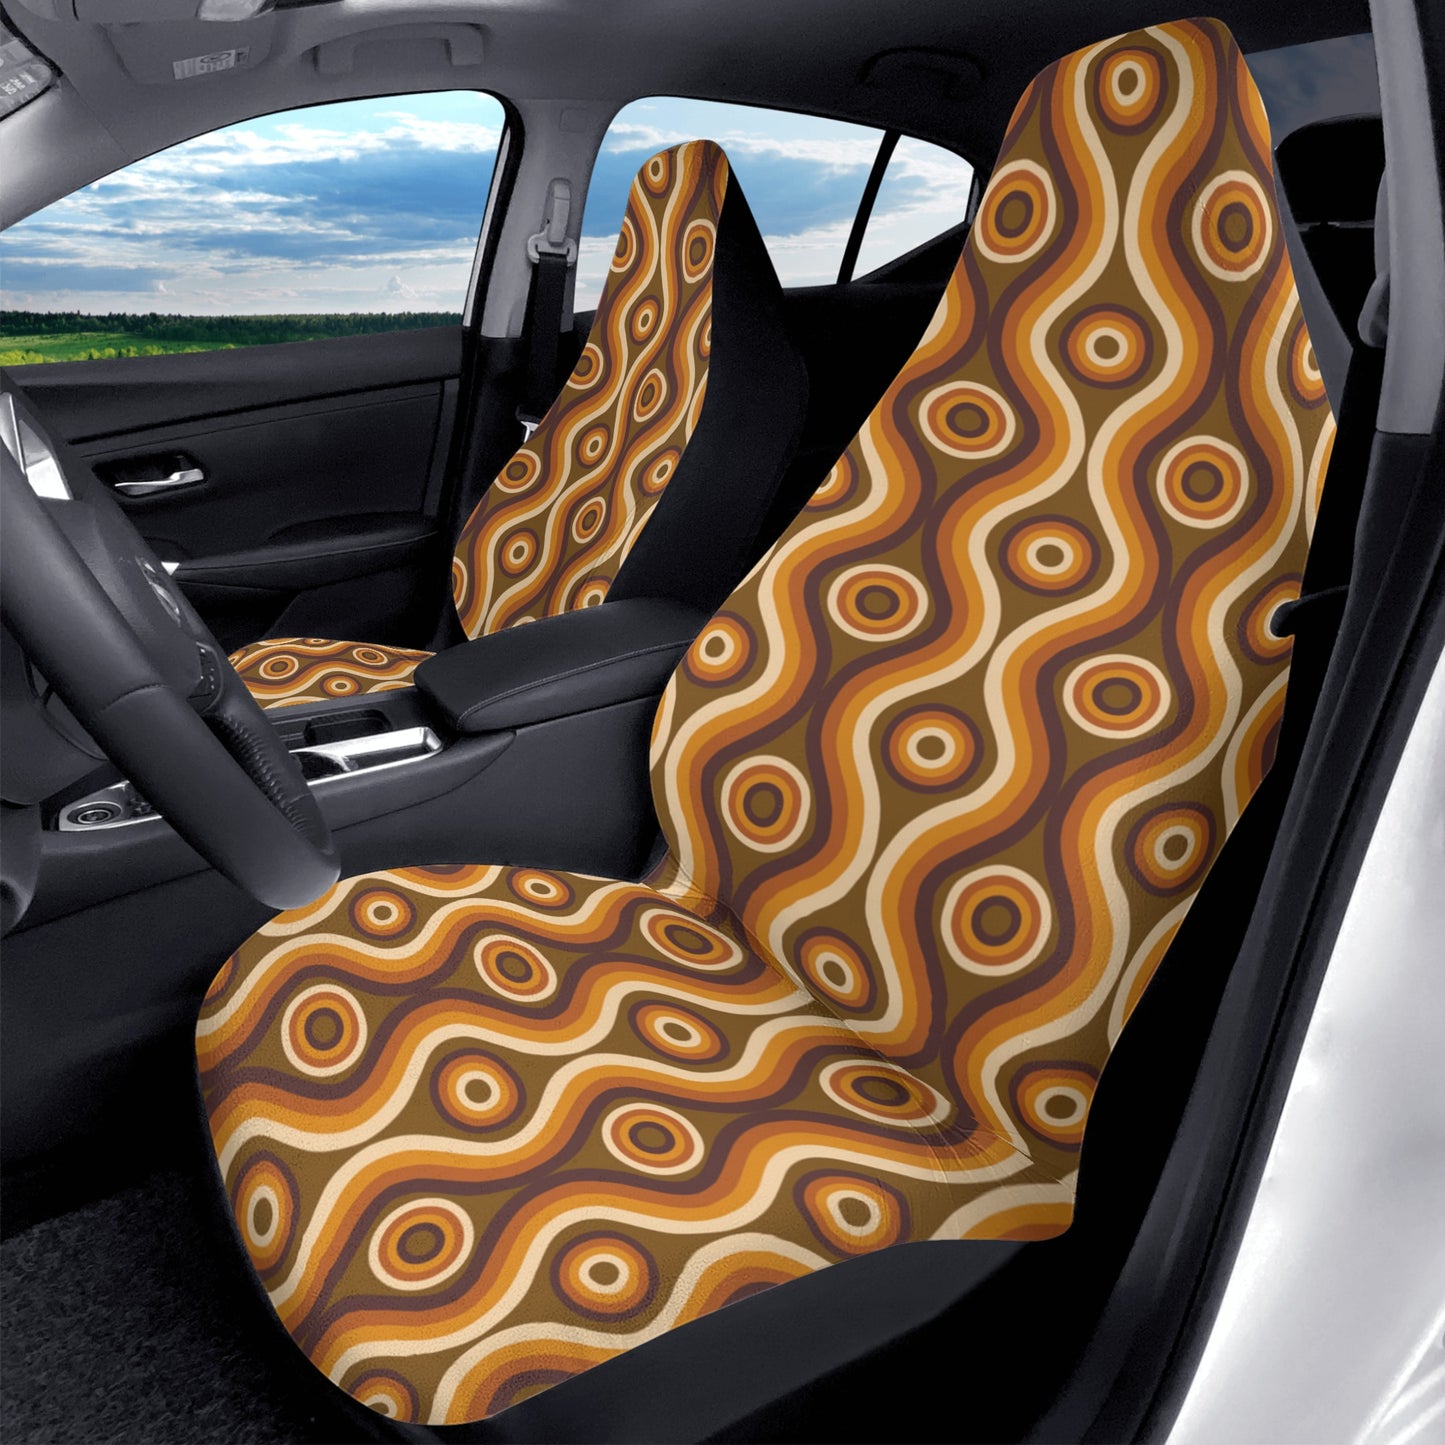 70s Retro Car Seat Covers (2 pcs), Brown Vintage Pattern Auto Front Seat Dog Pet Vehicle SUV Universal Protector Accessory Men Women Starcove Fashion